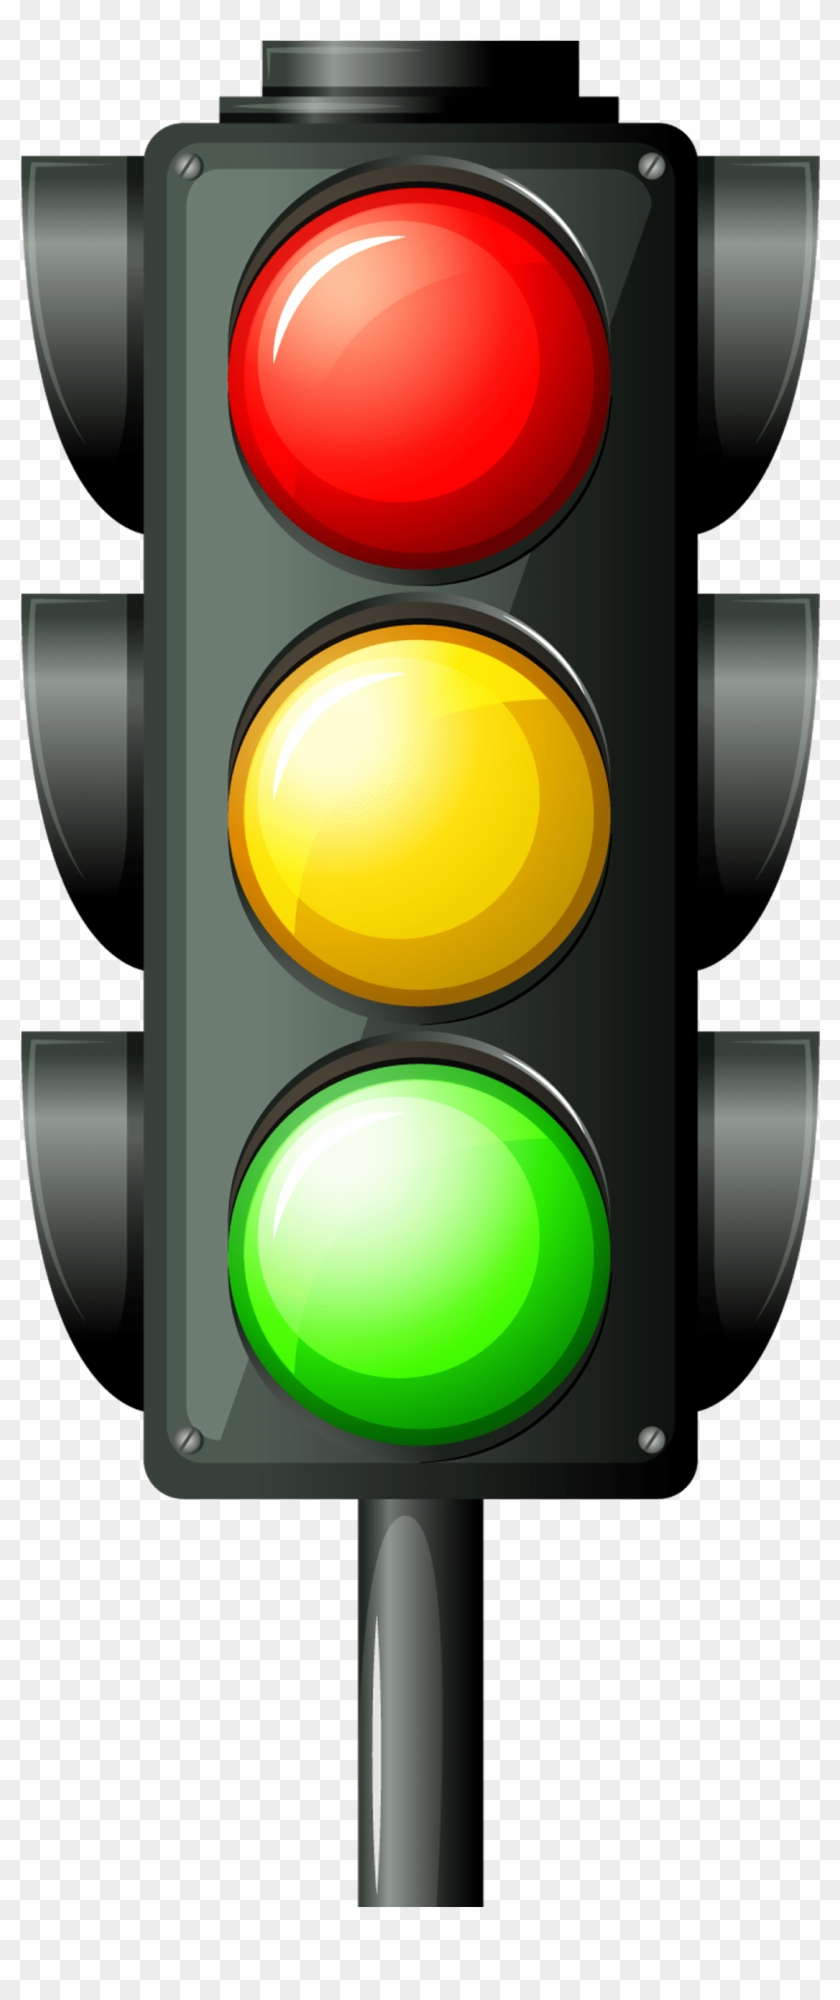 Traffic Light Png Images Free Download - Flash Card Of Traffic Lights Clipart #2593700